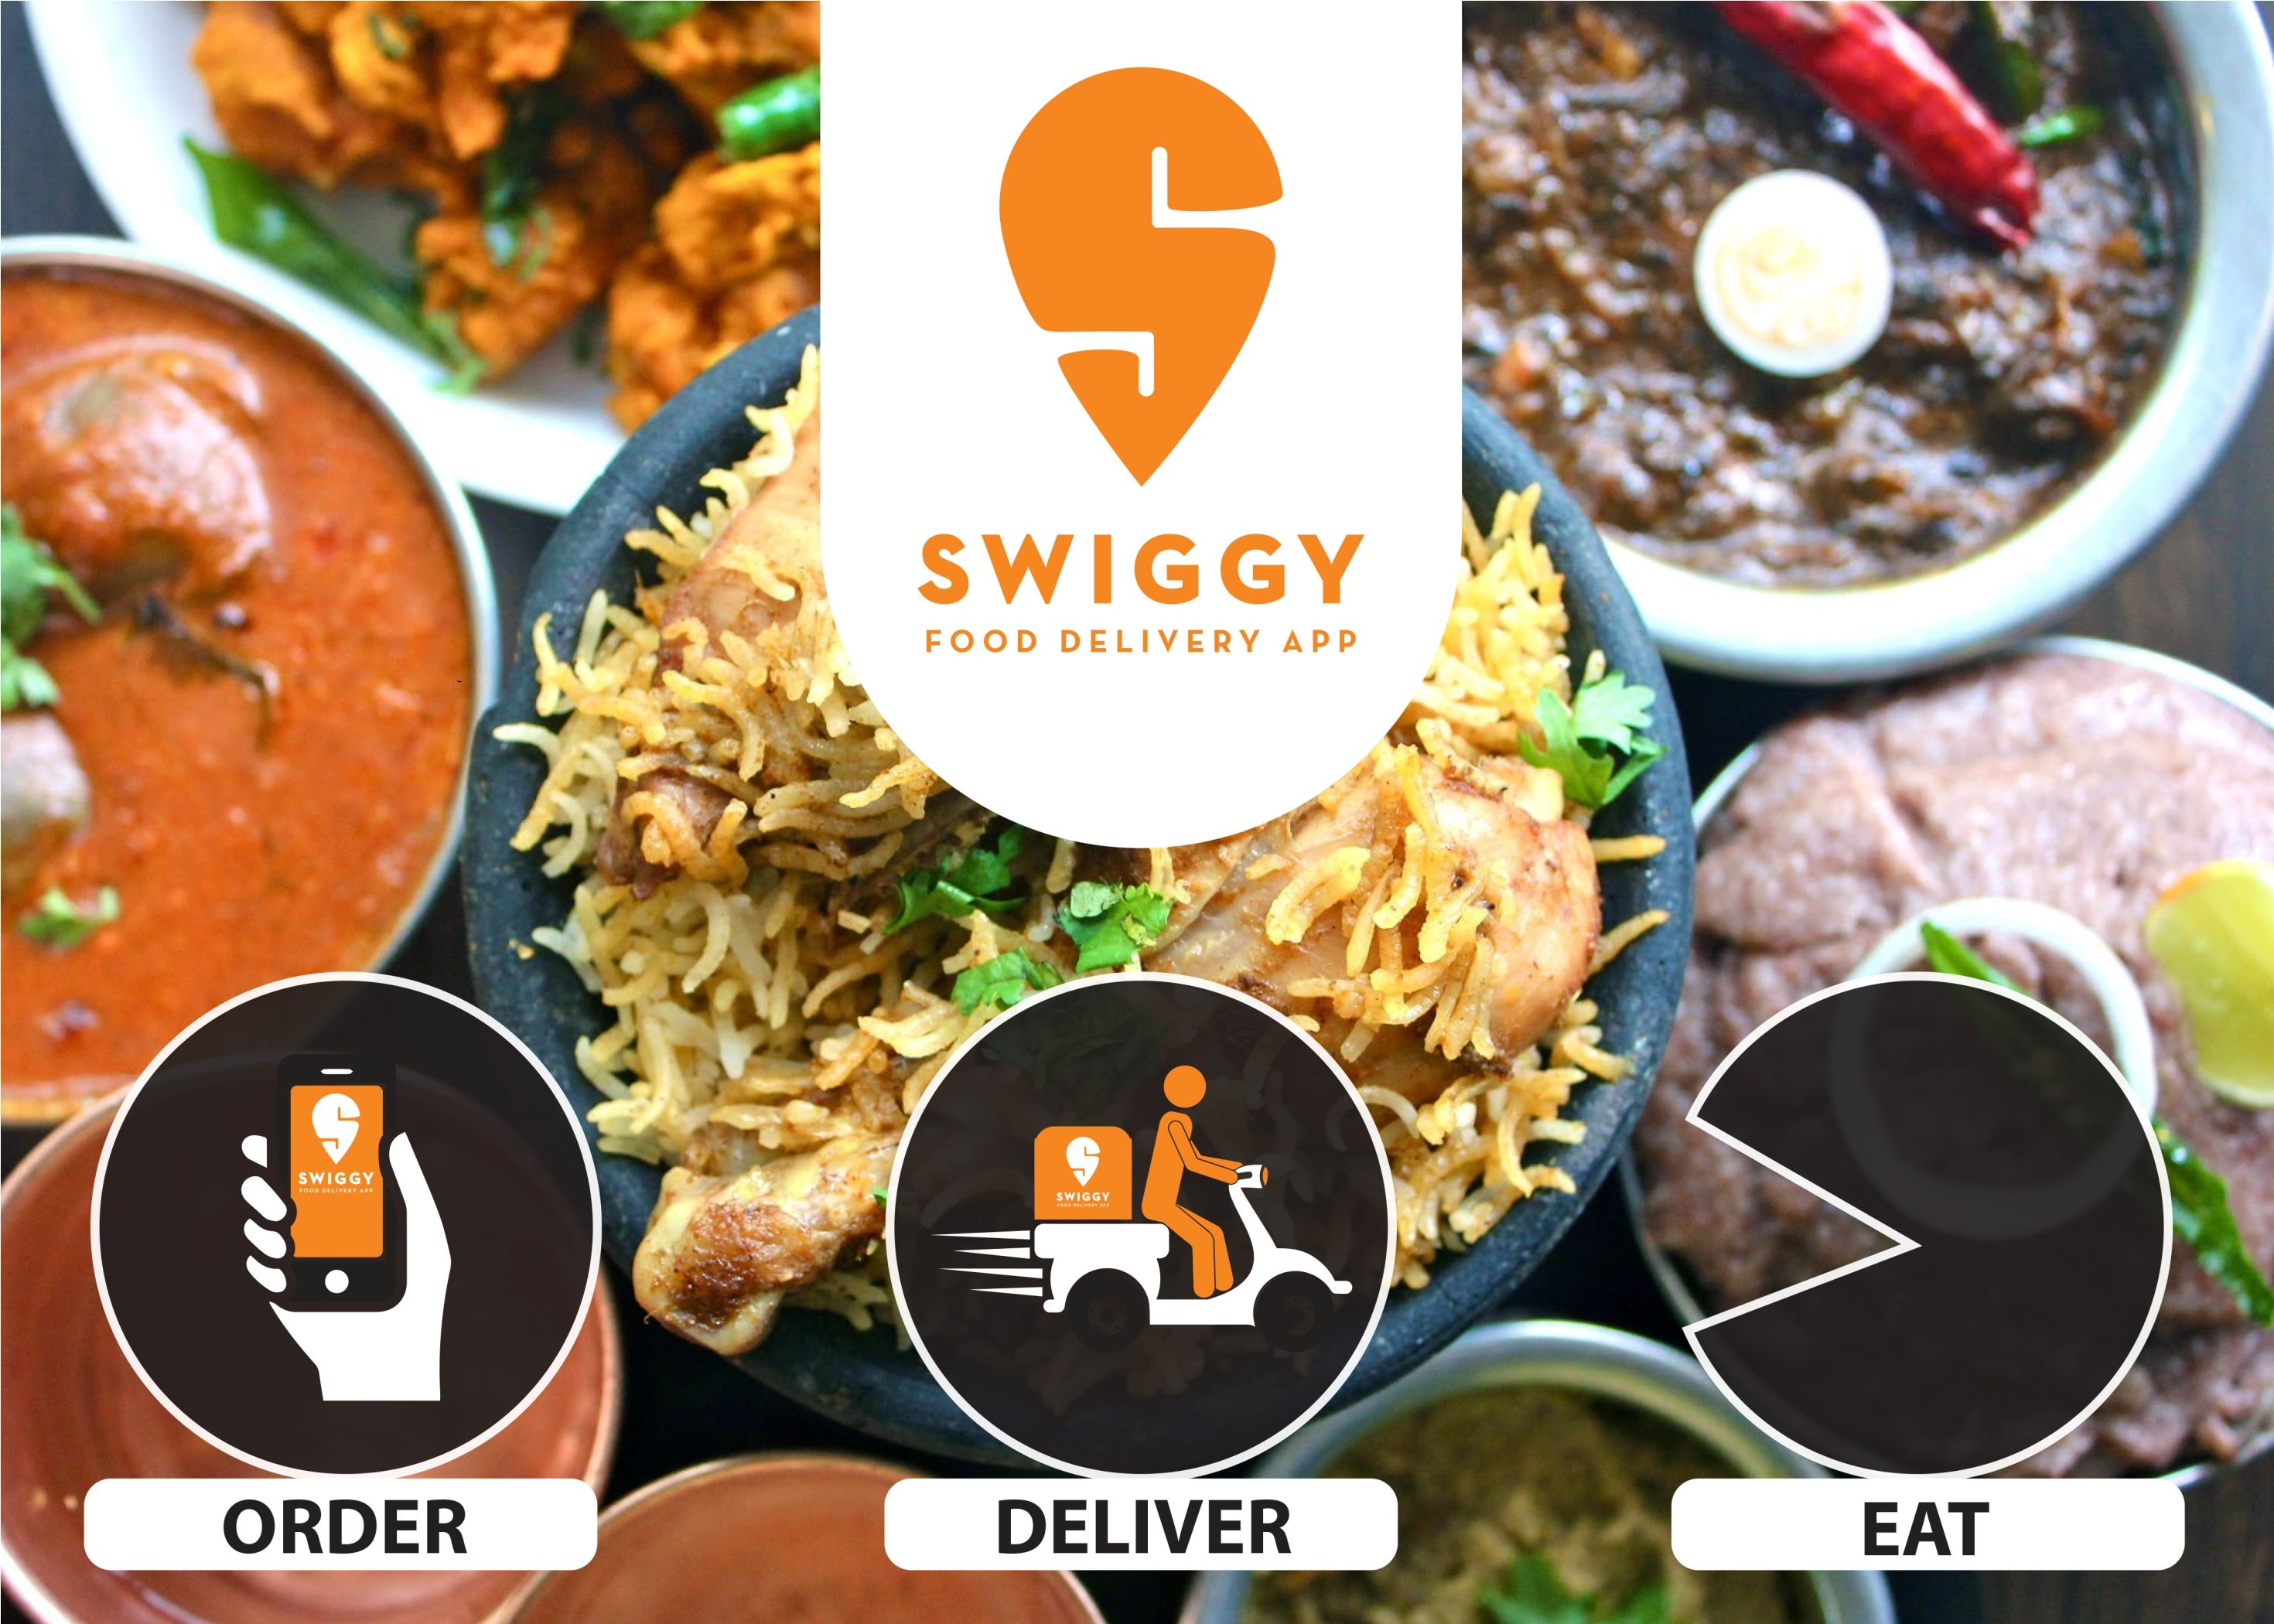 Swiggy App Bangalore startup. Swiggy food delivery, Food delivery